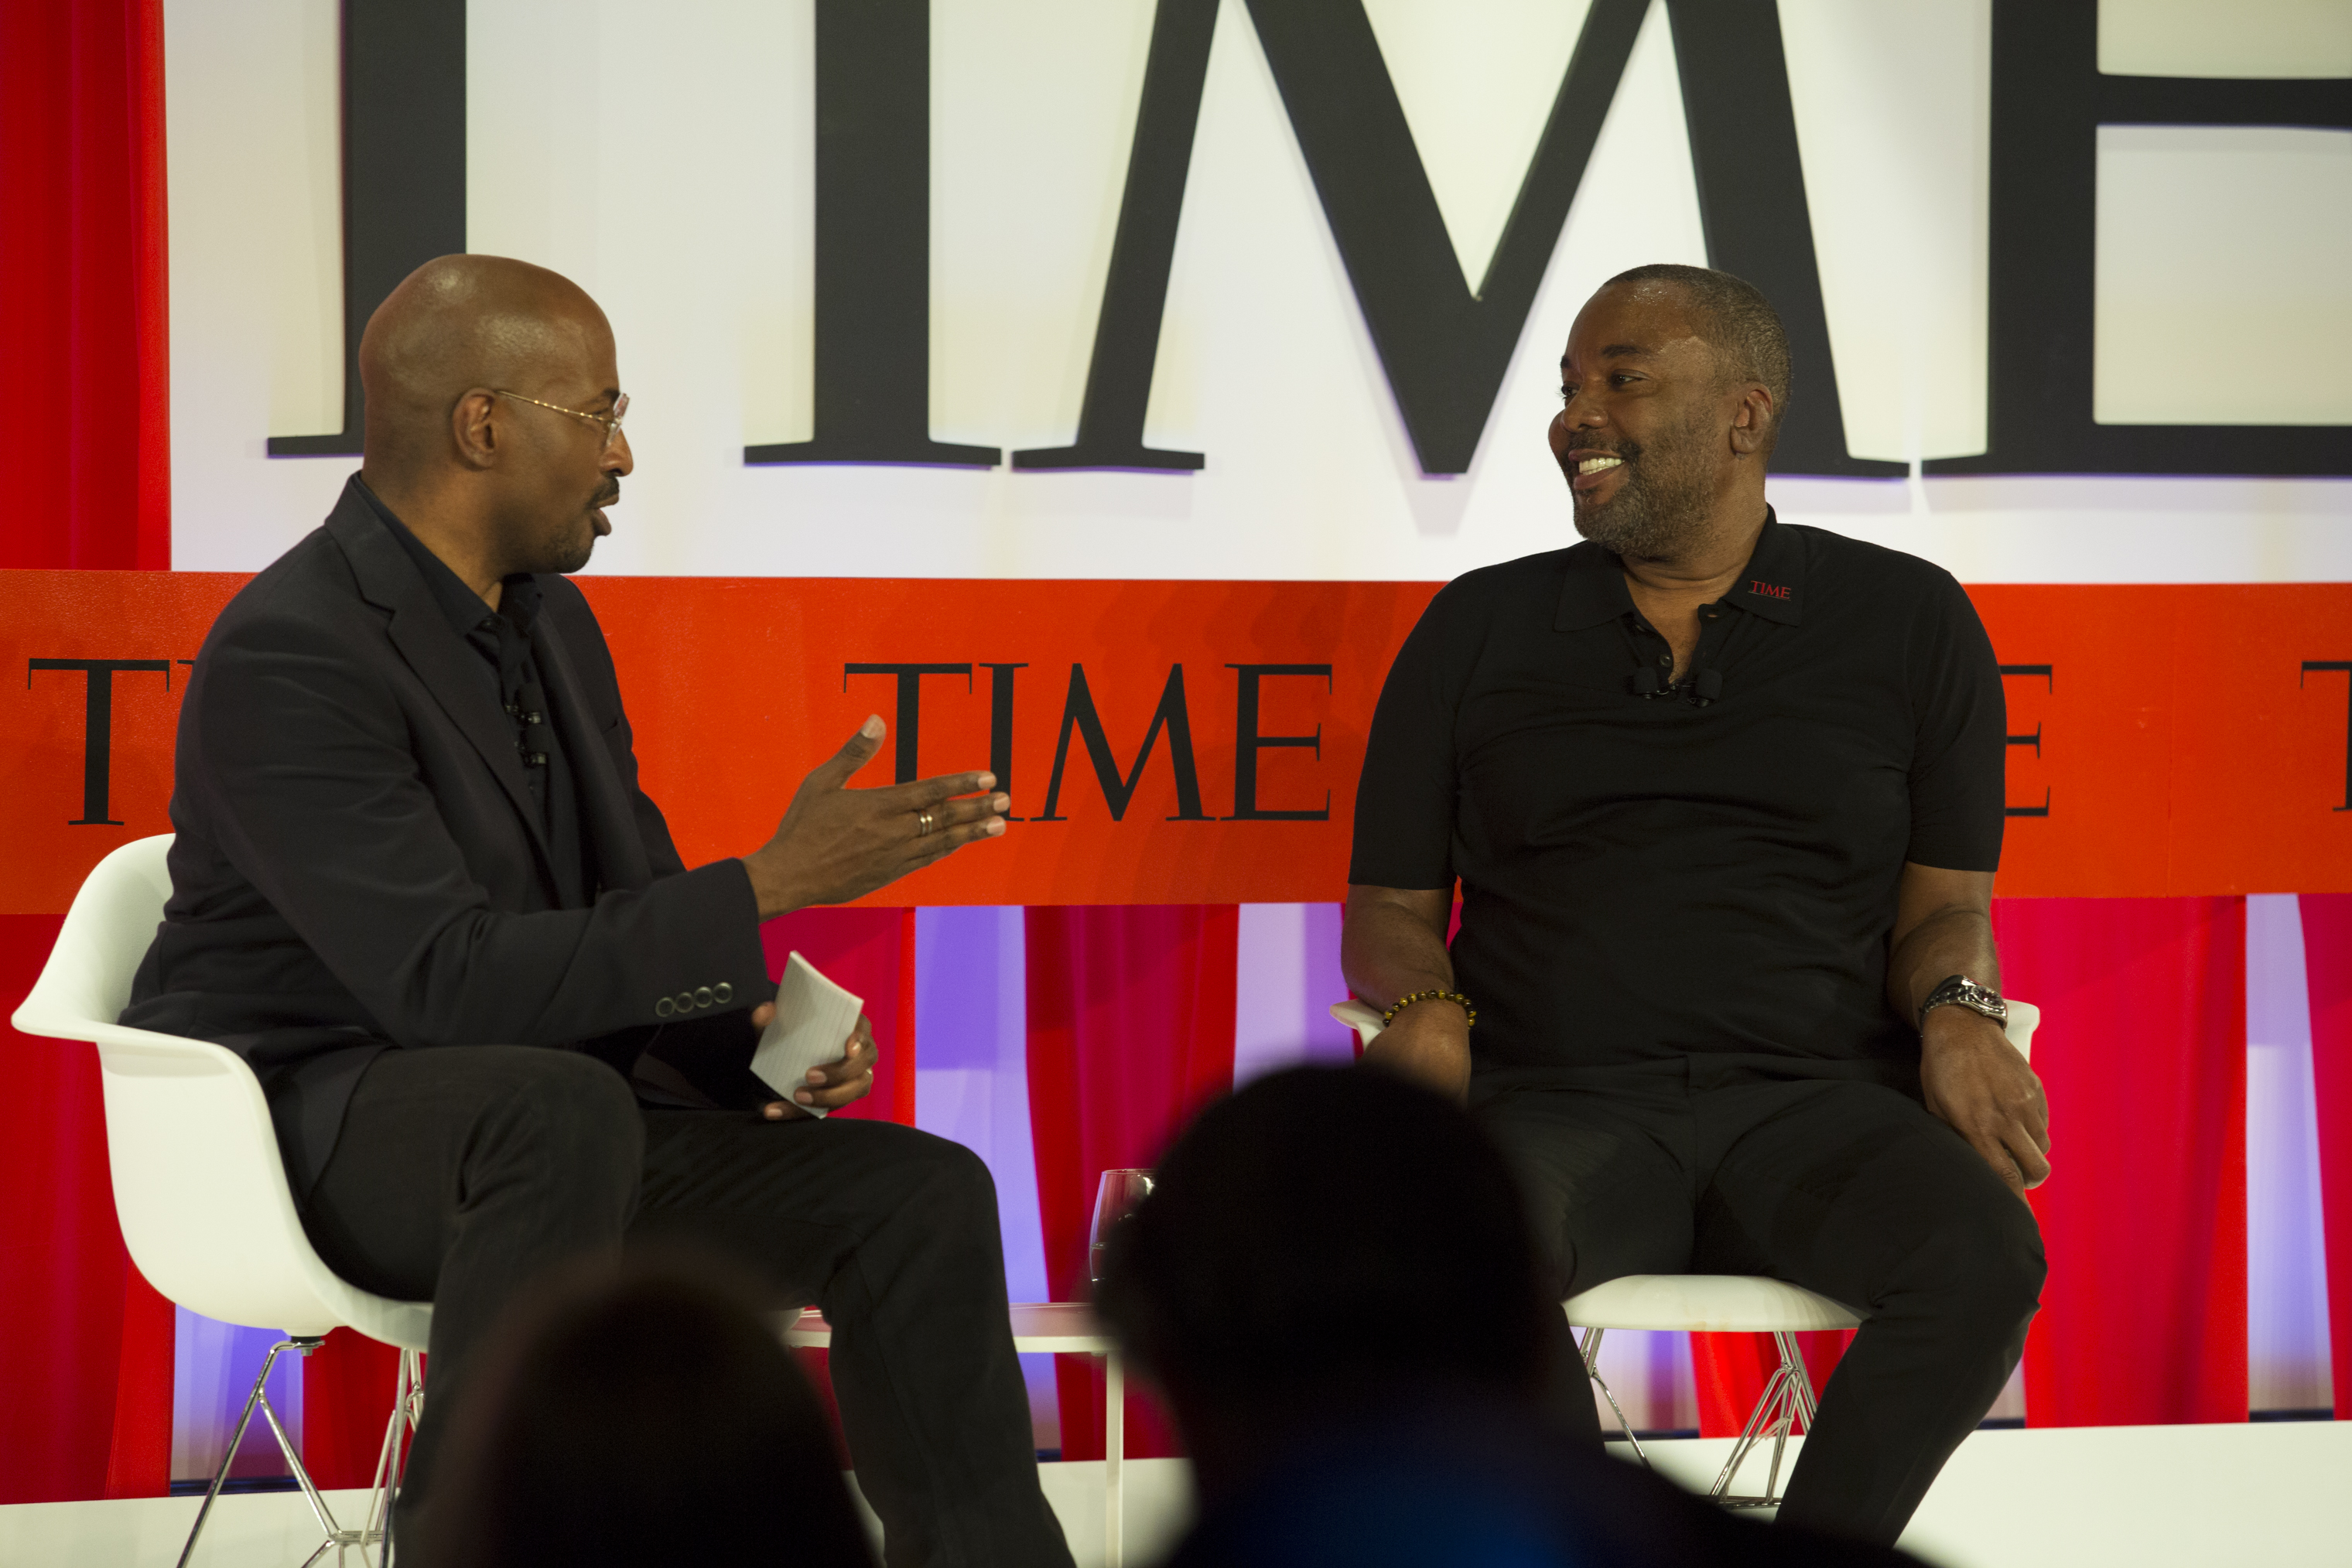 Writer, producer and director Lee Daniels talks to CNN political commentator Van Jones about leading by disruption at the TIME 100 Summit  in New York on April 23, 2019. (Krisanne Johnson for TIME)